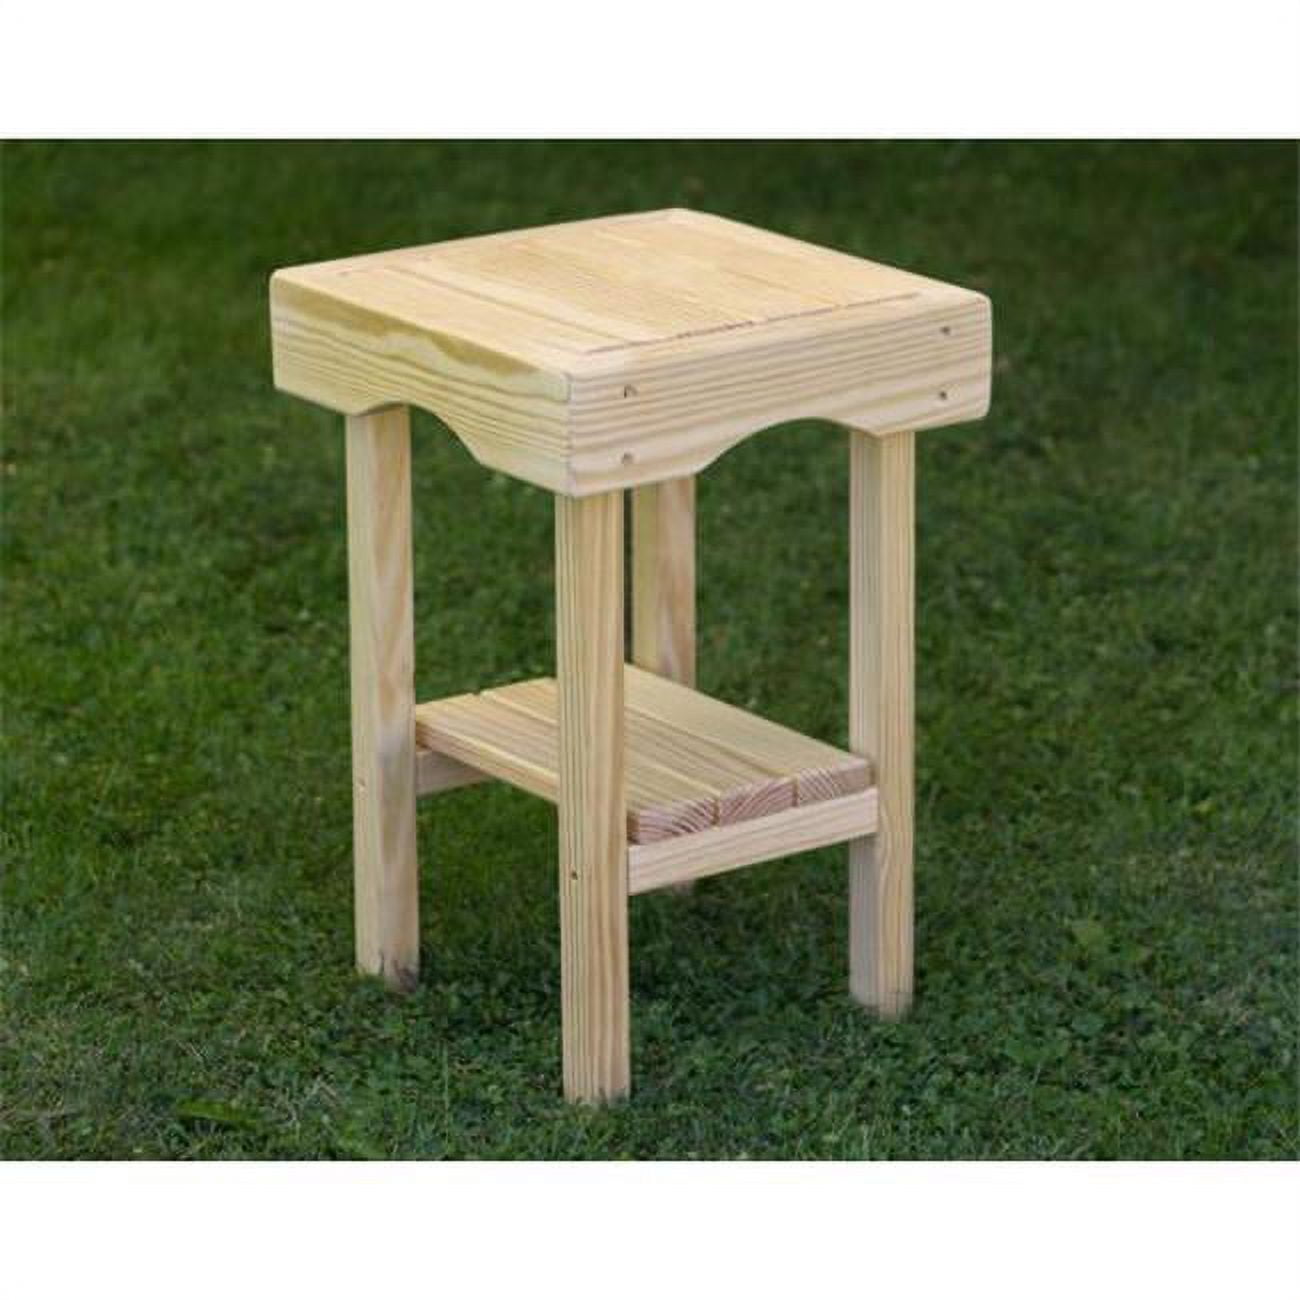 Fct2020cvd 20 X 20 In. Treated Pine Square End Table